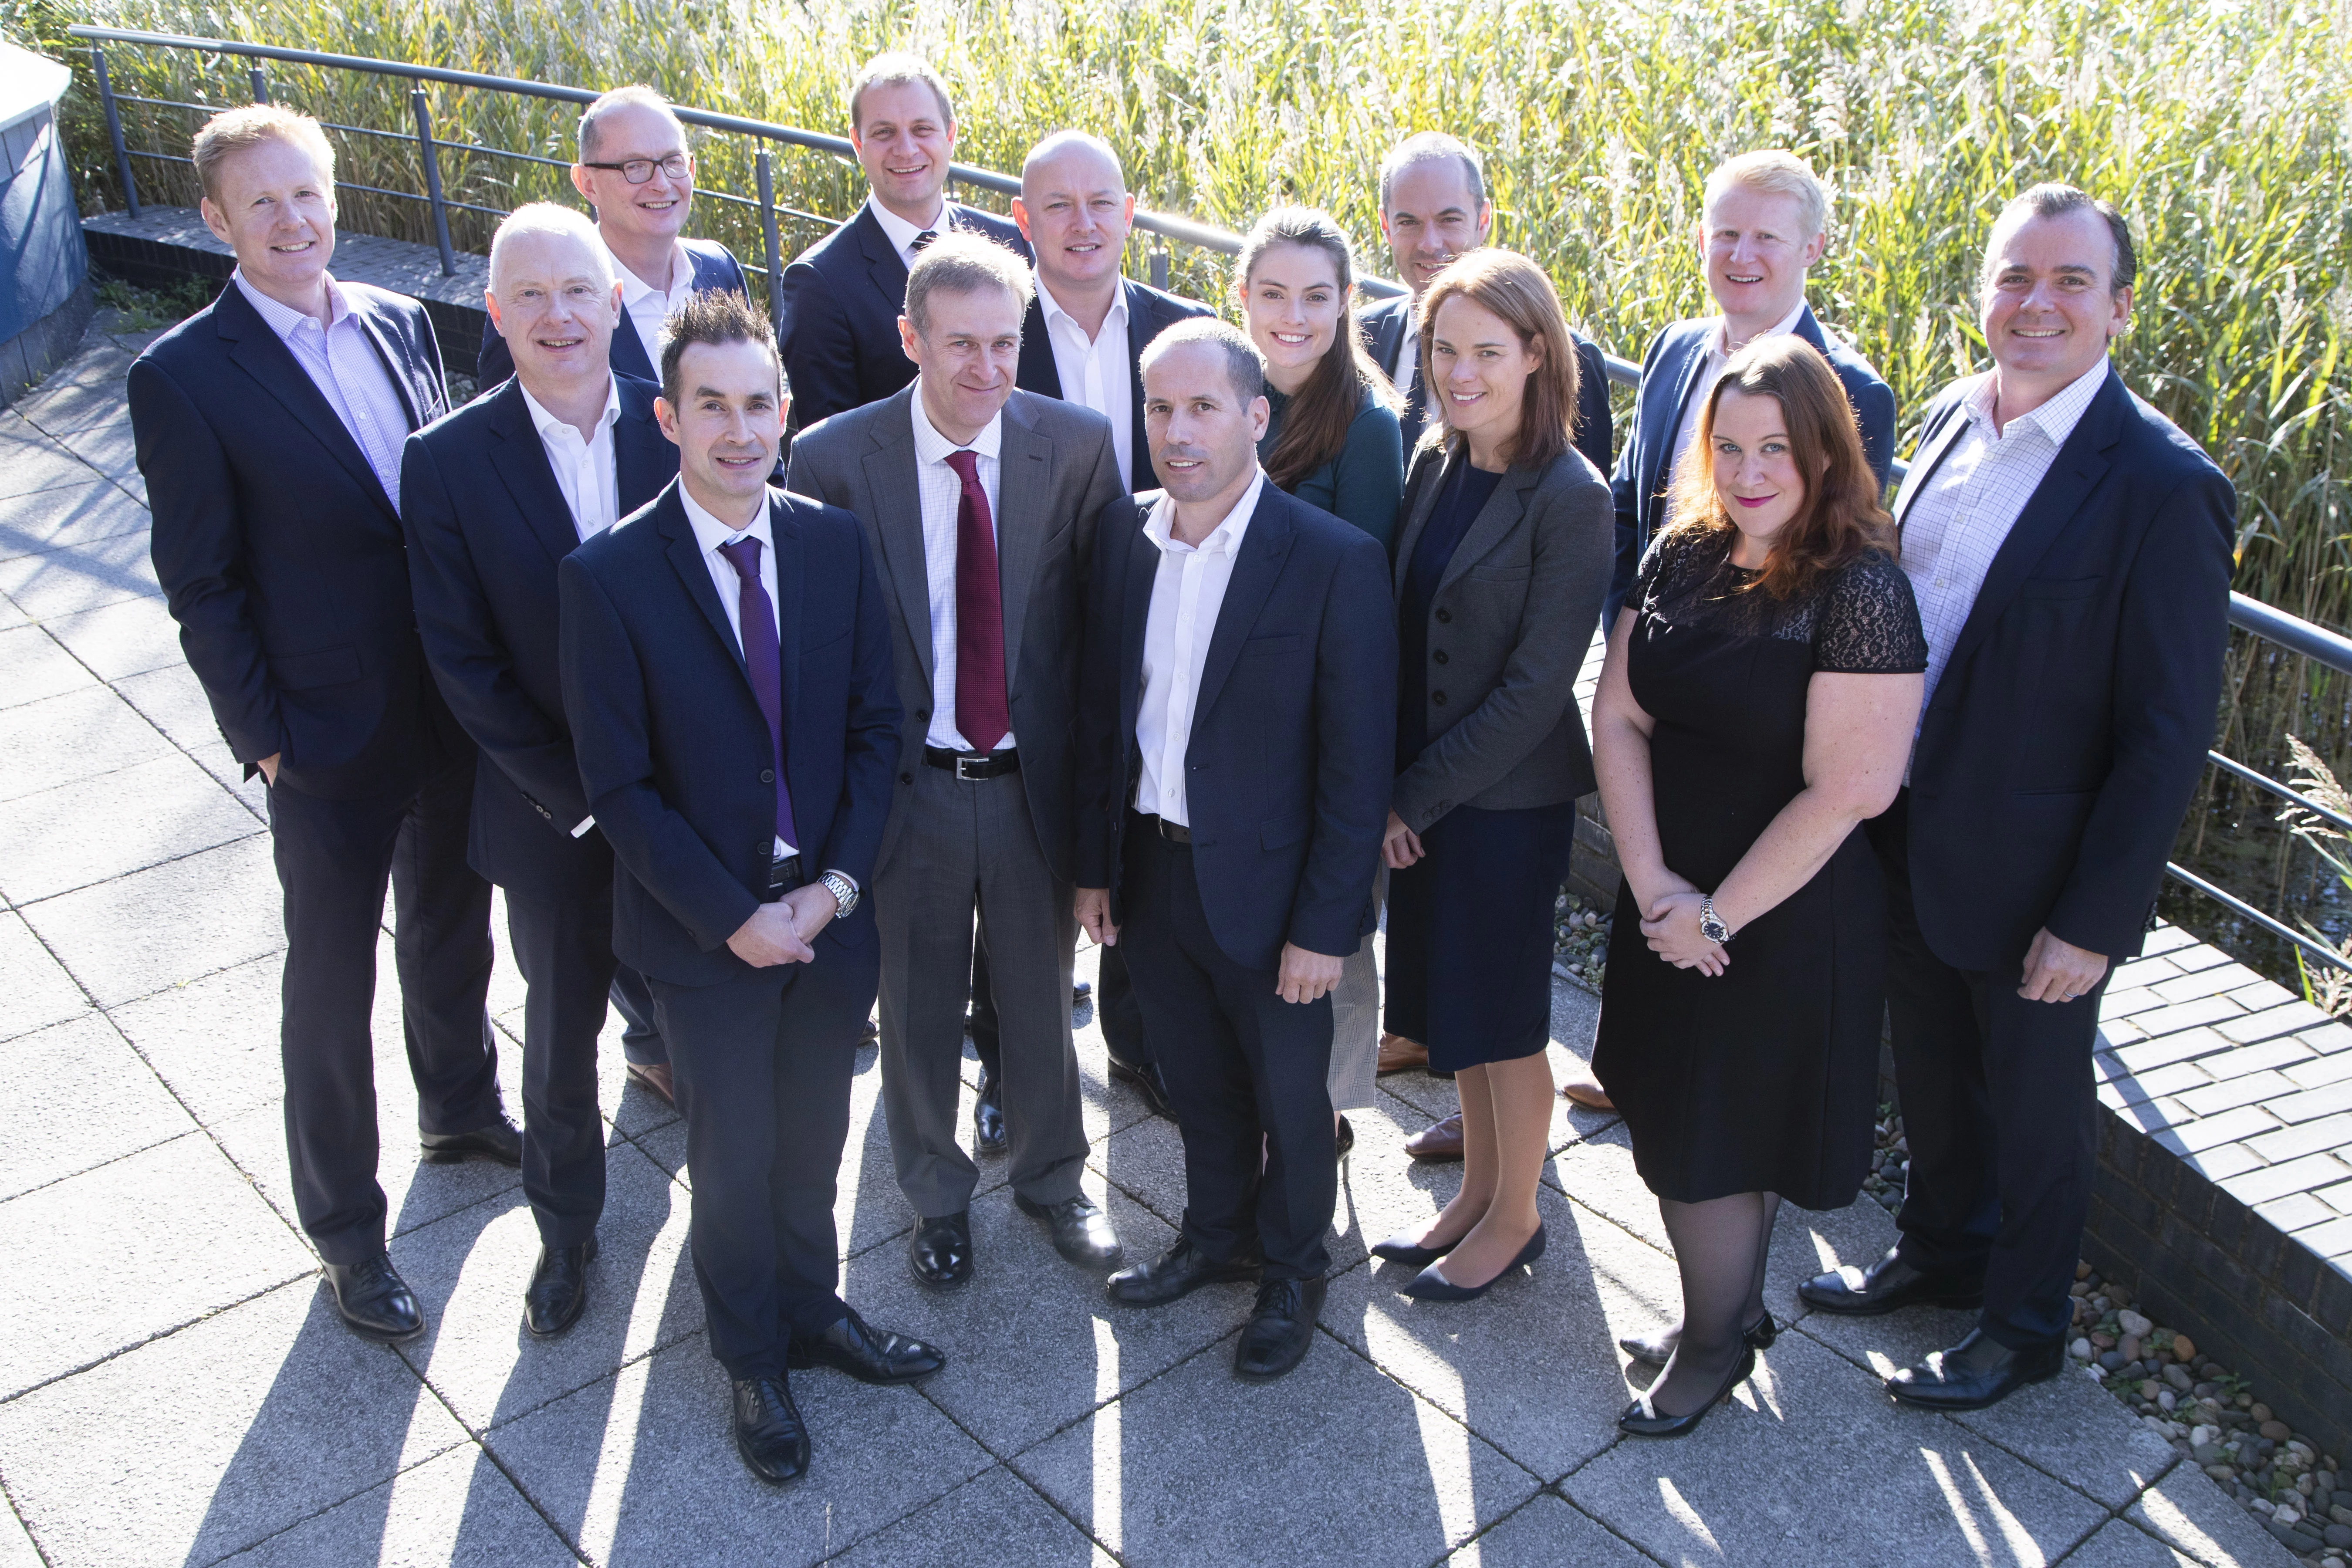 Invest North East England's delegation includes leaders from some of the region's biggest businesses